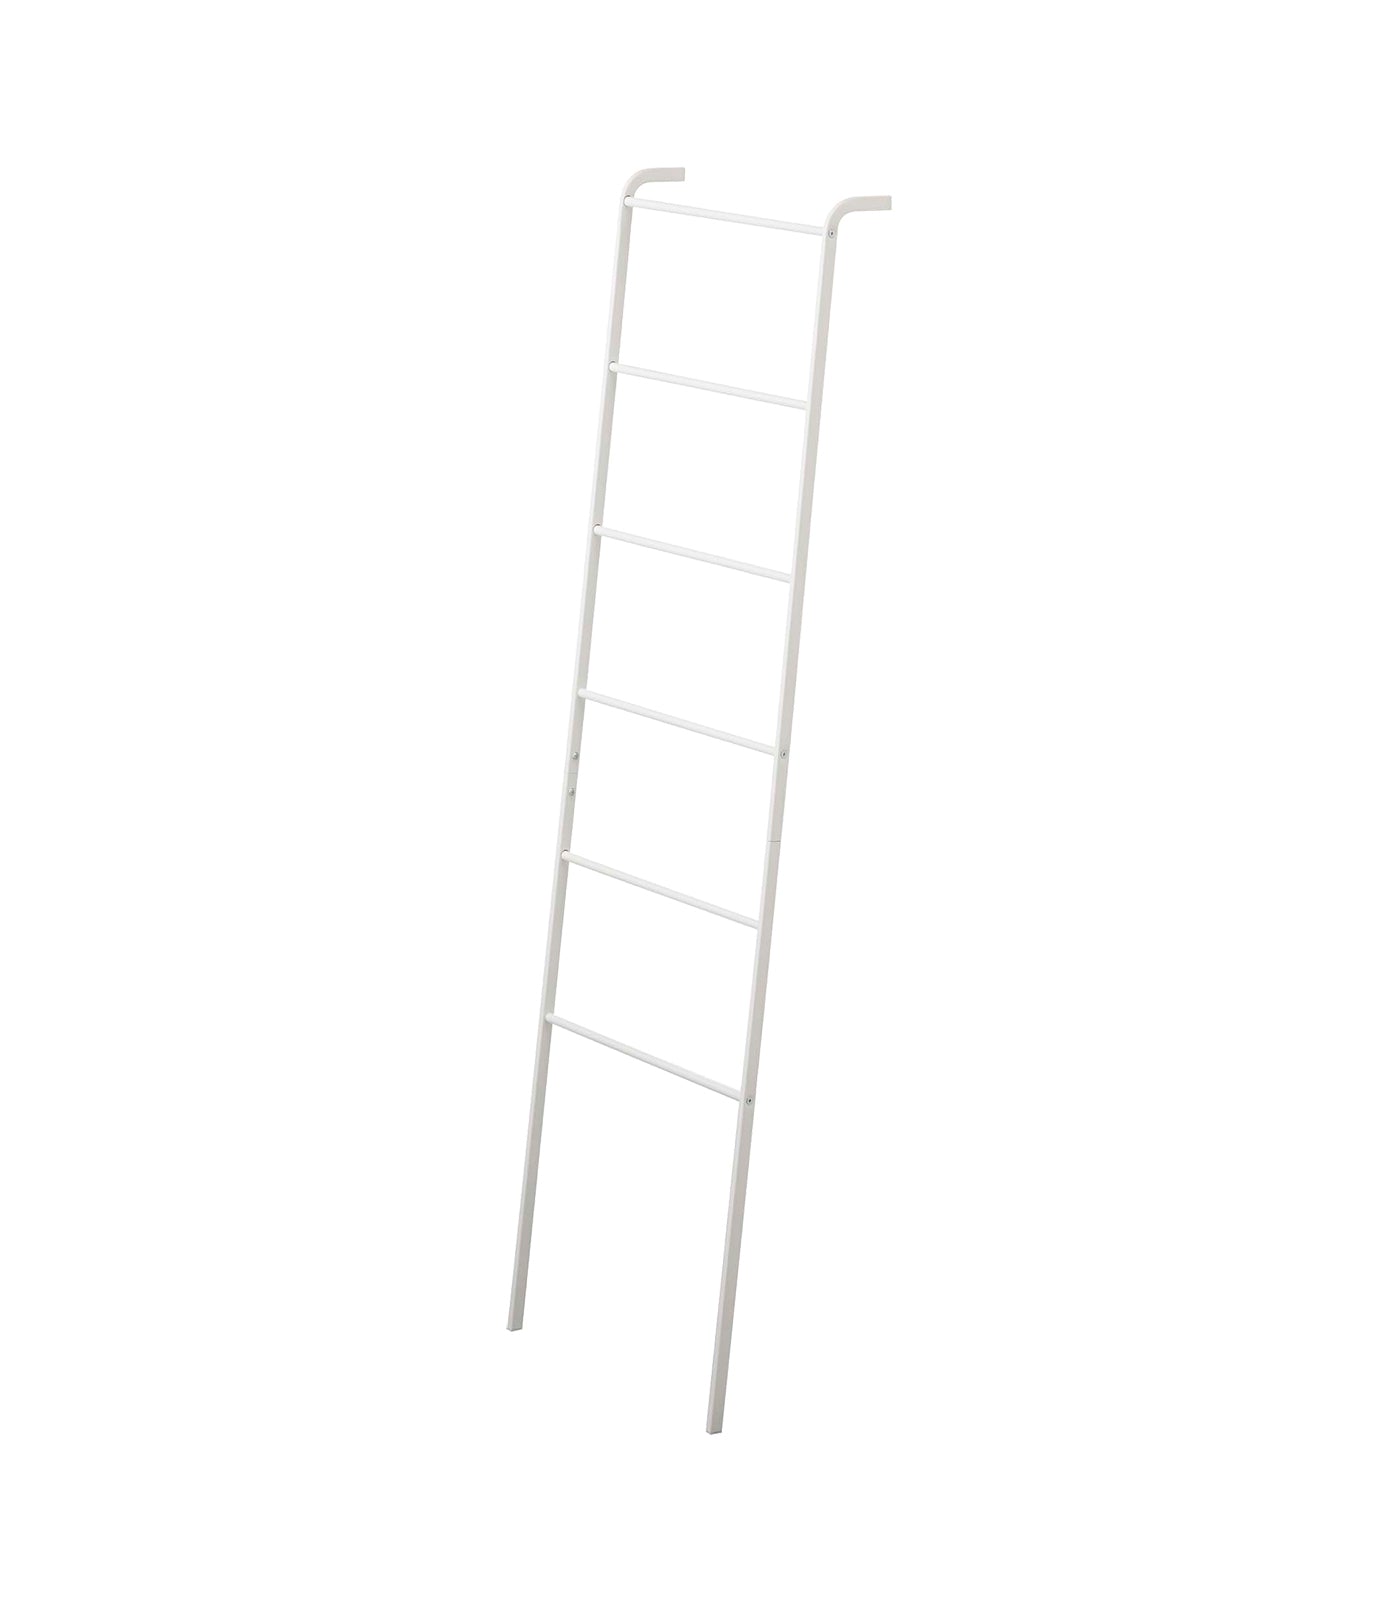 Leaning Storage Ladder on a blank background.